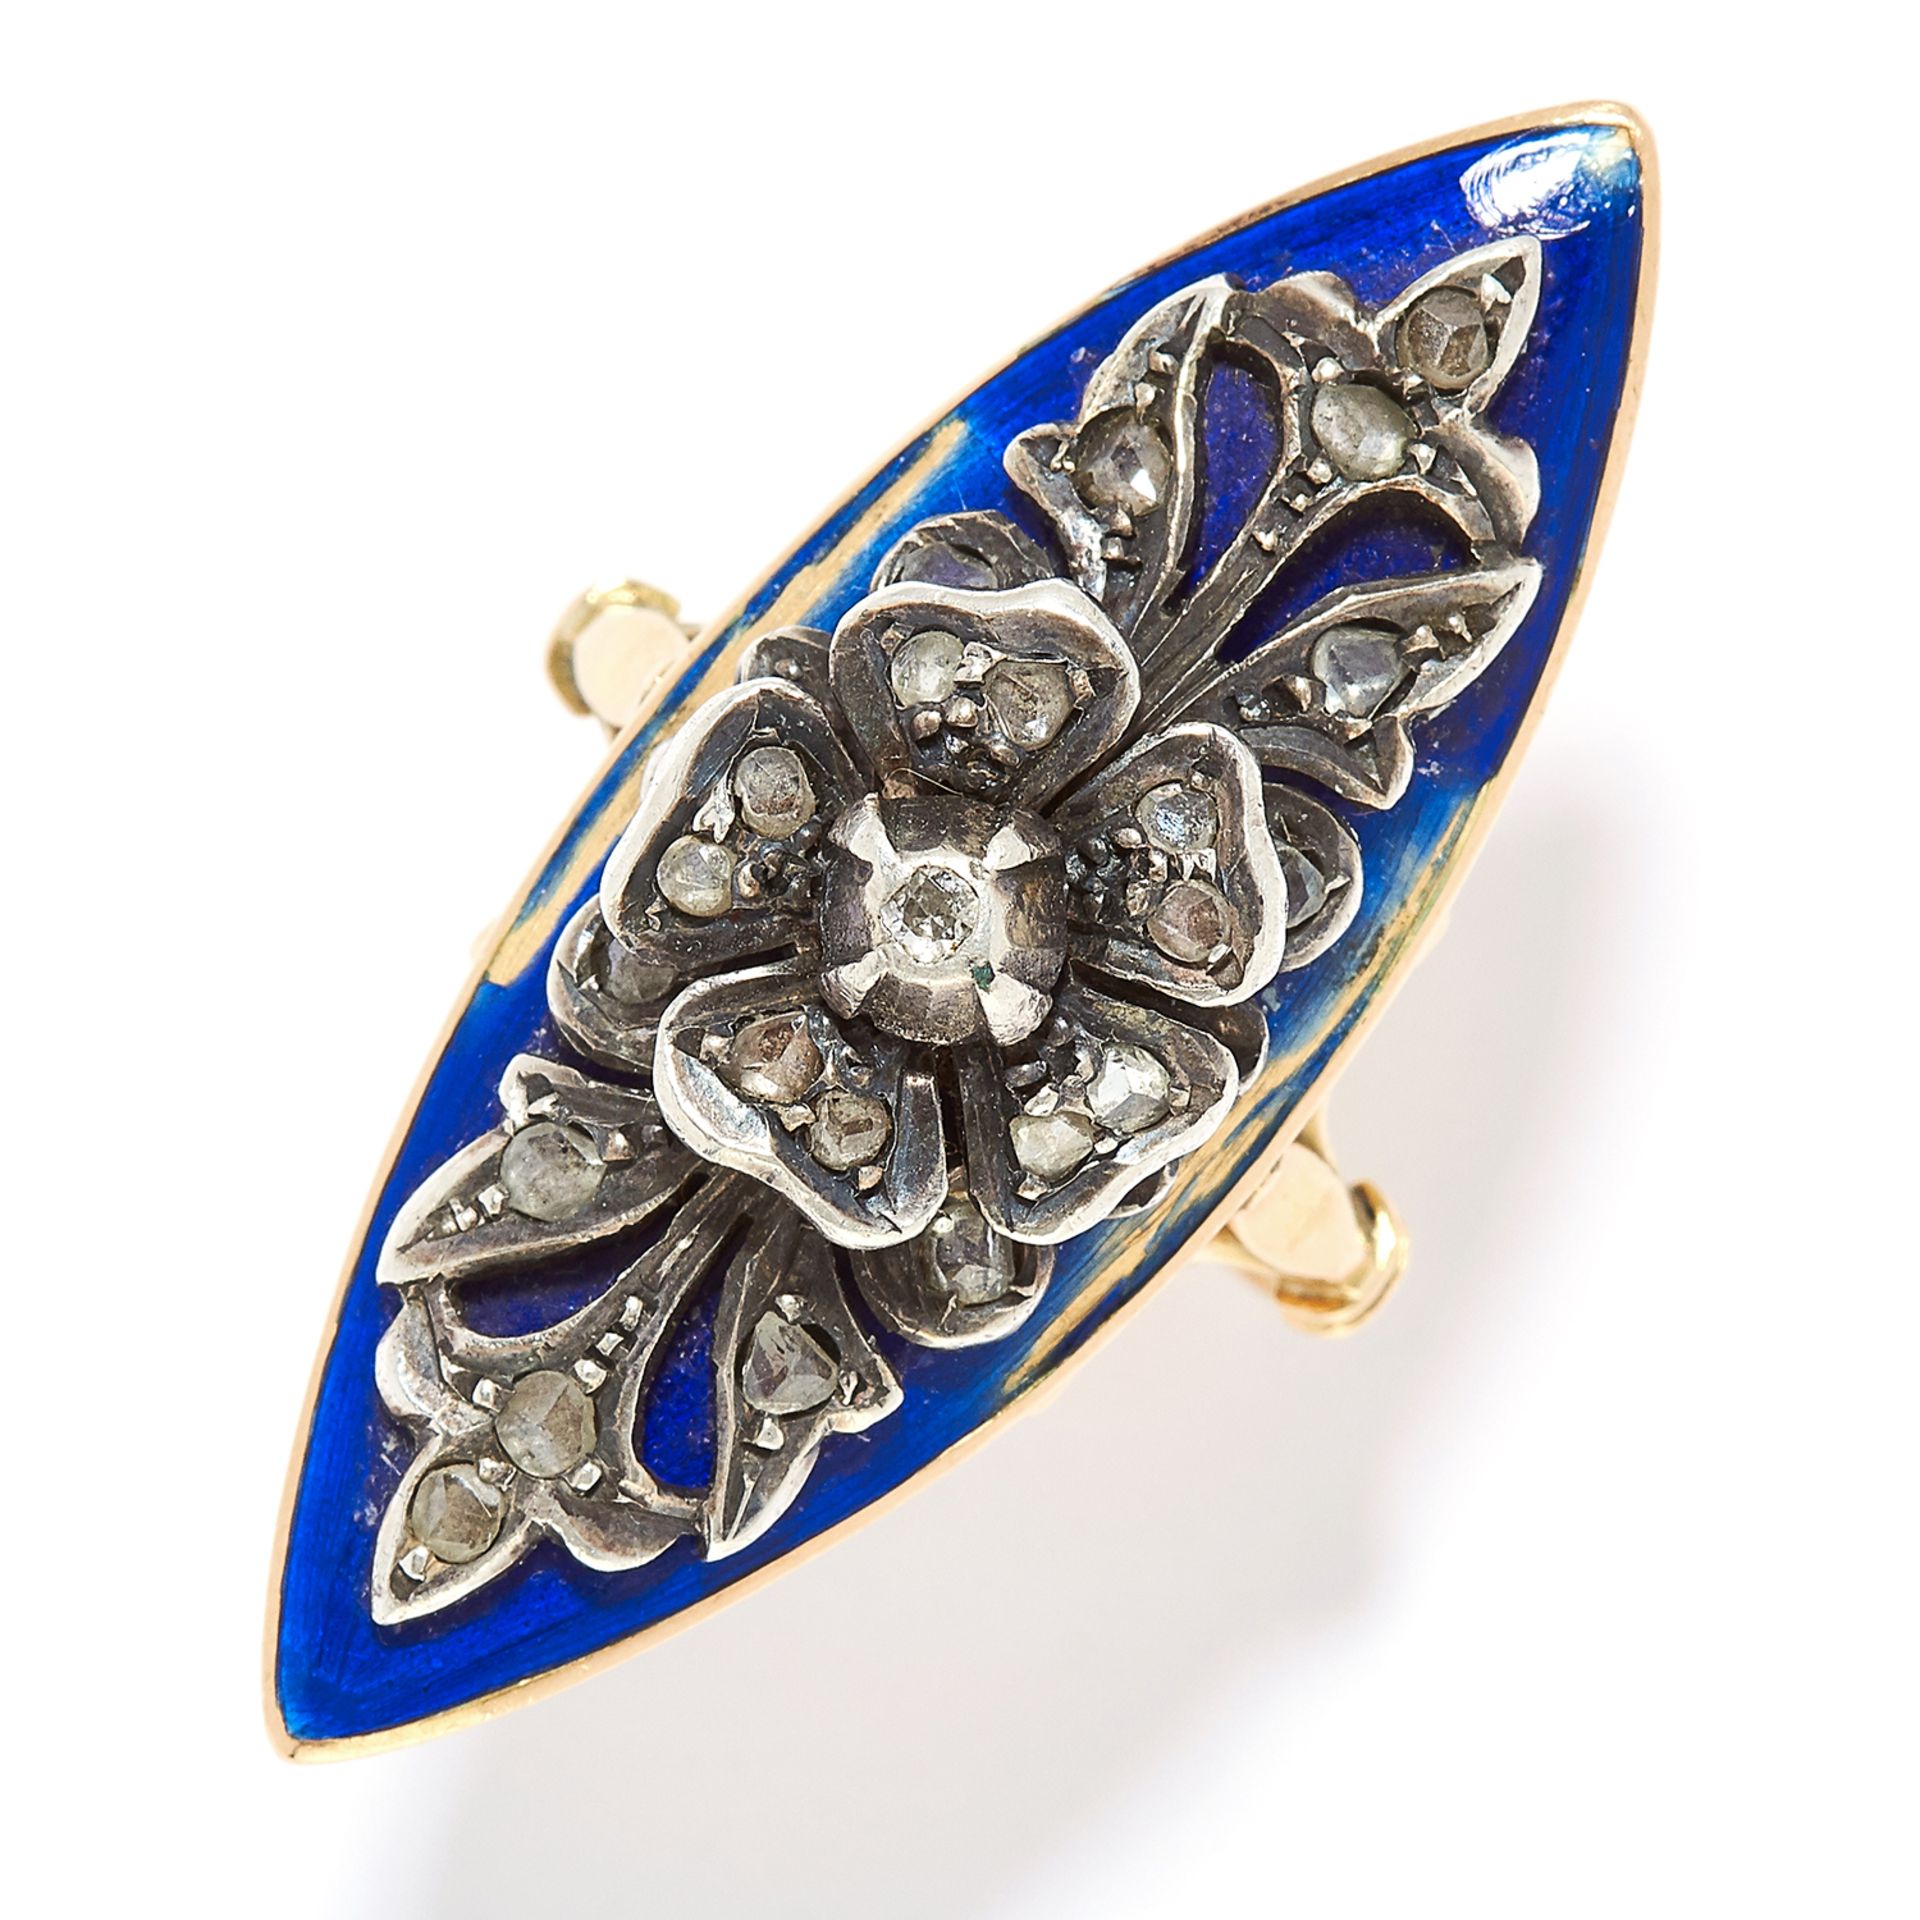 ANTIQUE DIAMOND AND ENAMEL RING, 19TH CENTURY in 18ct yellow gold, the marquise face is set with